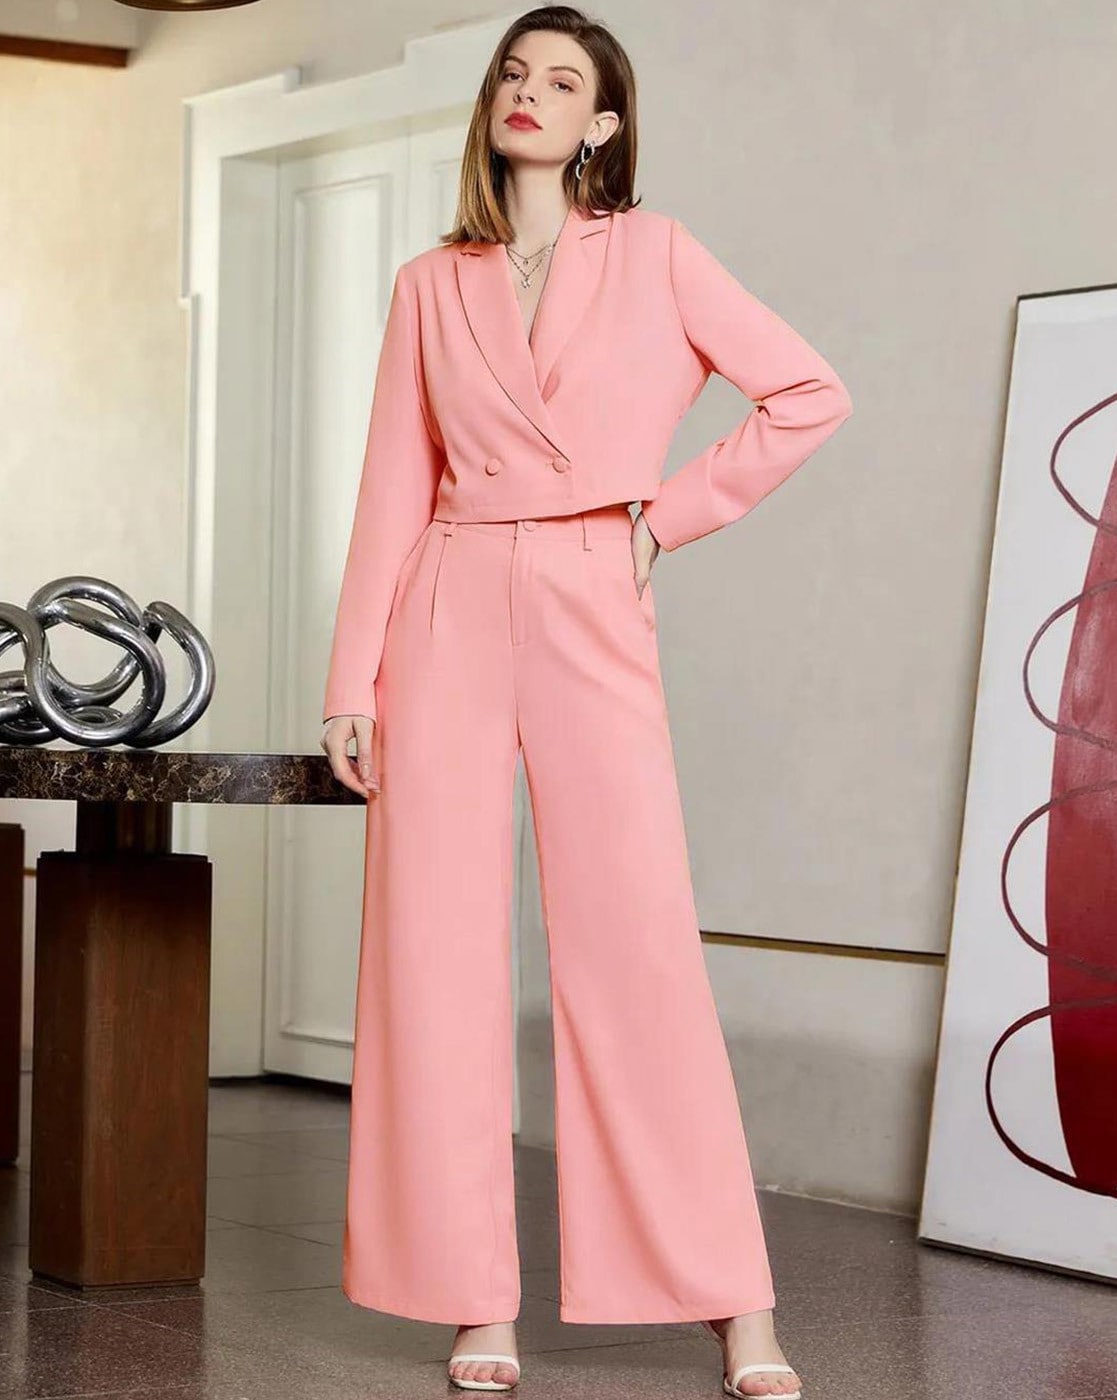 Arrow Boutique Company - ••• Hot Pink Jodifl Dress Pants ••• Material: 100%  polyester Flatlay Inseam Measurement (size small) 26.5 Add approx 1.5 per  each additional size. Small (2-4) Medium (6-8 )